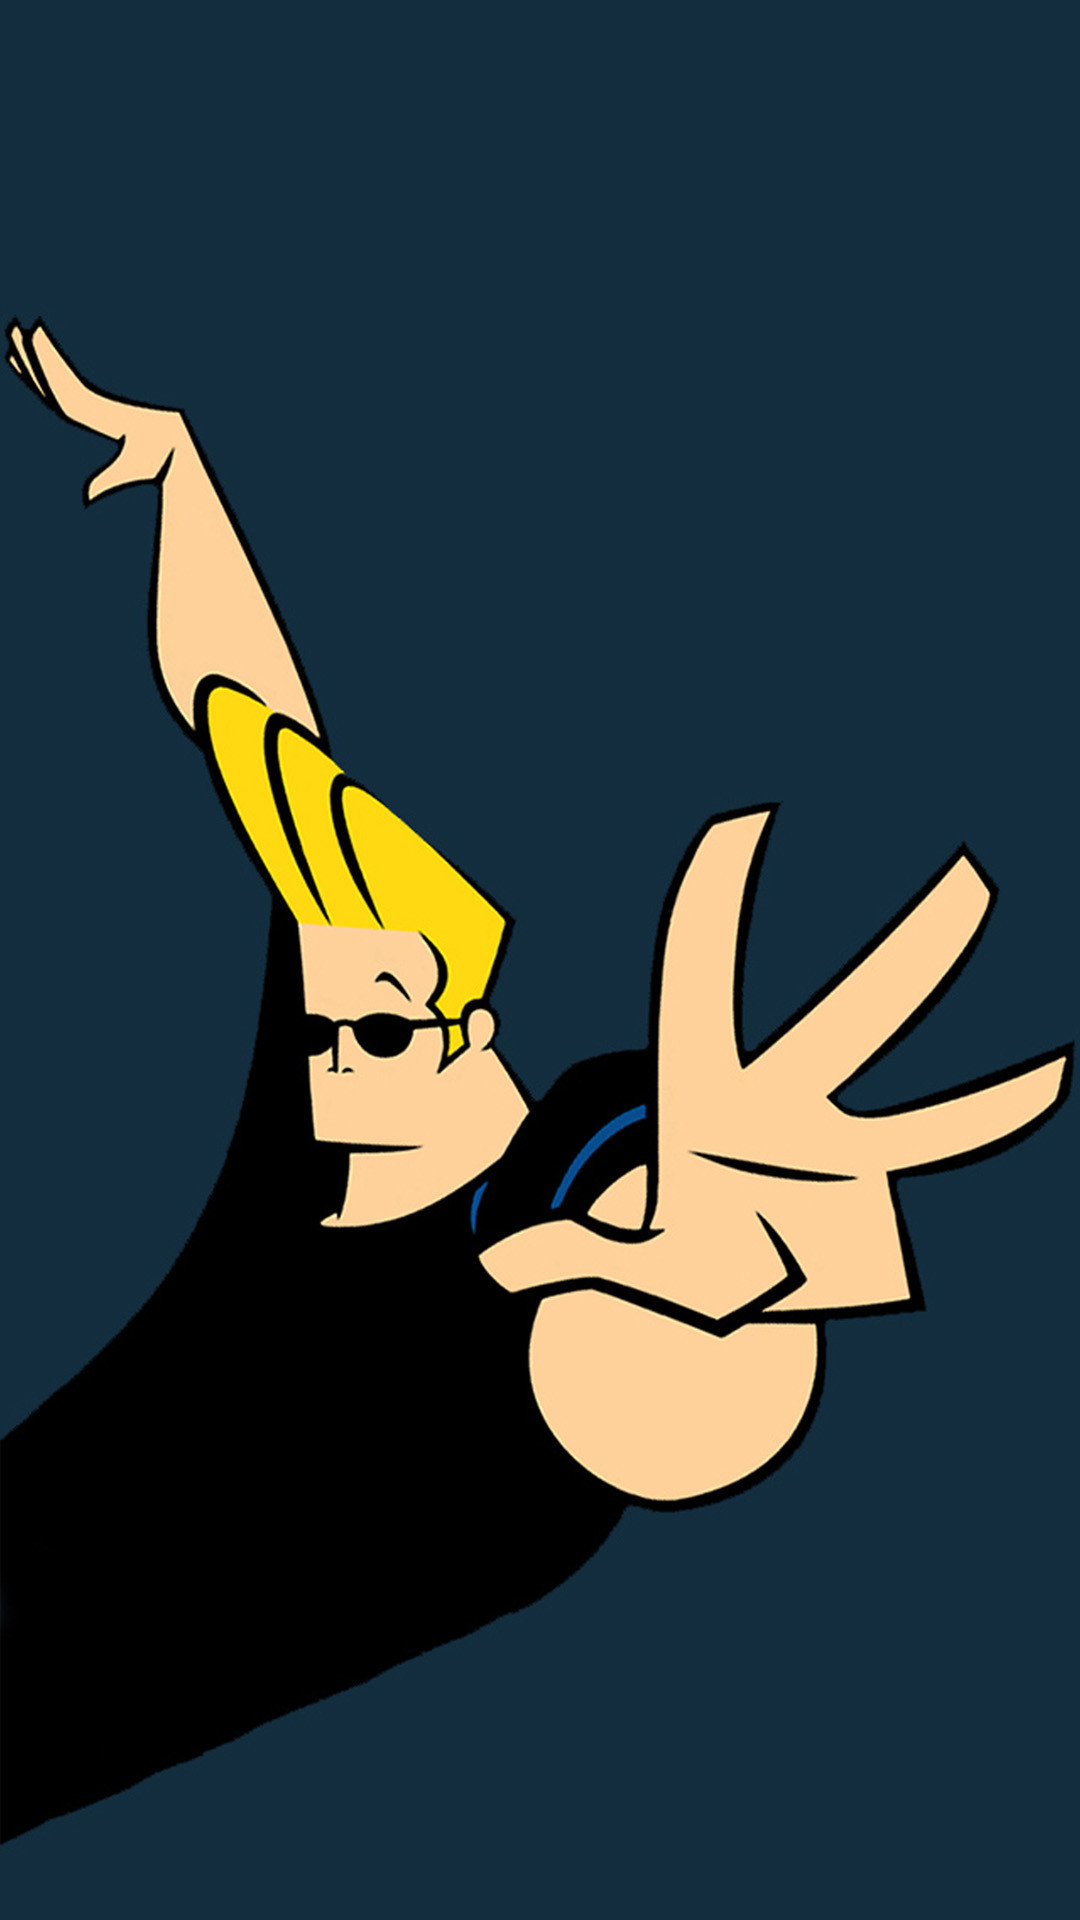 1080x1920 Johnny Bravo Wallpapers for Galaxy S5 